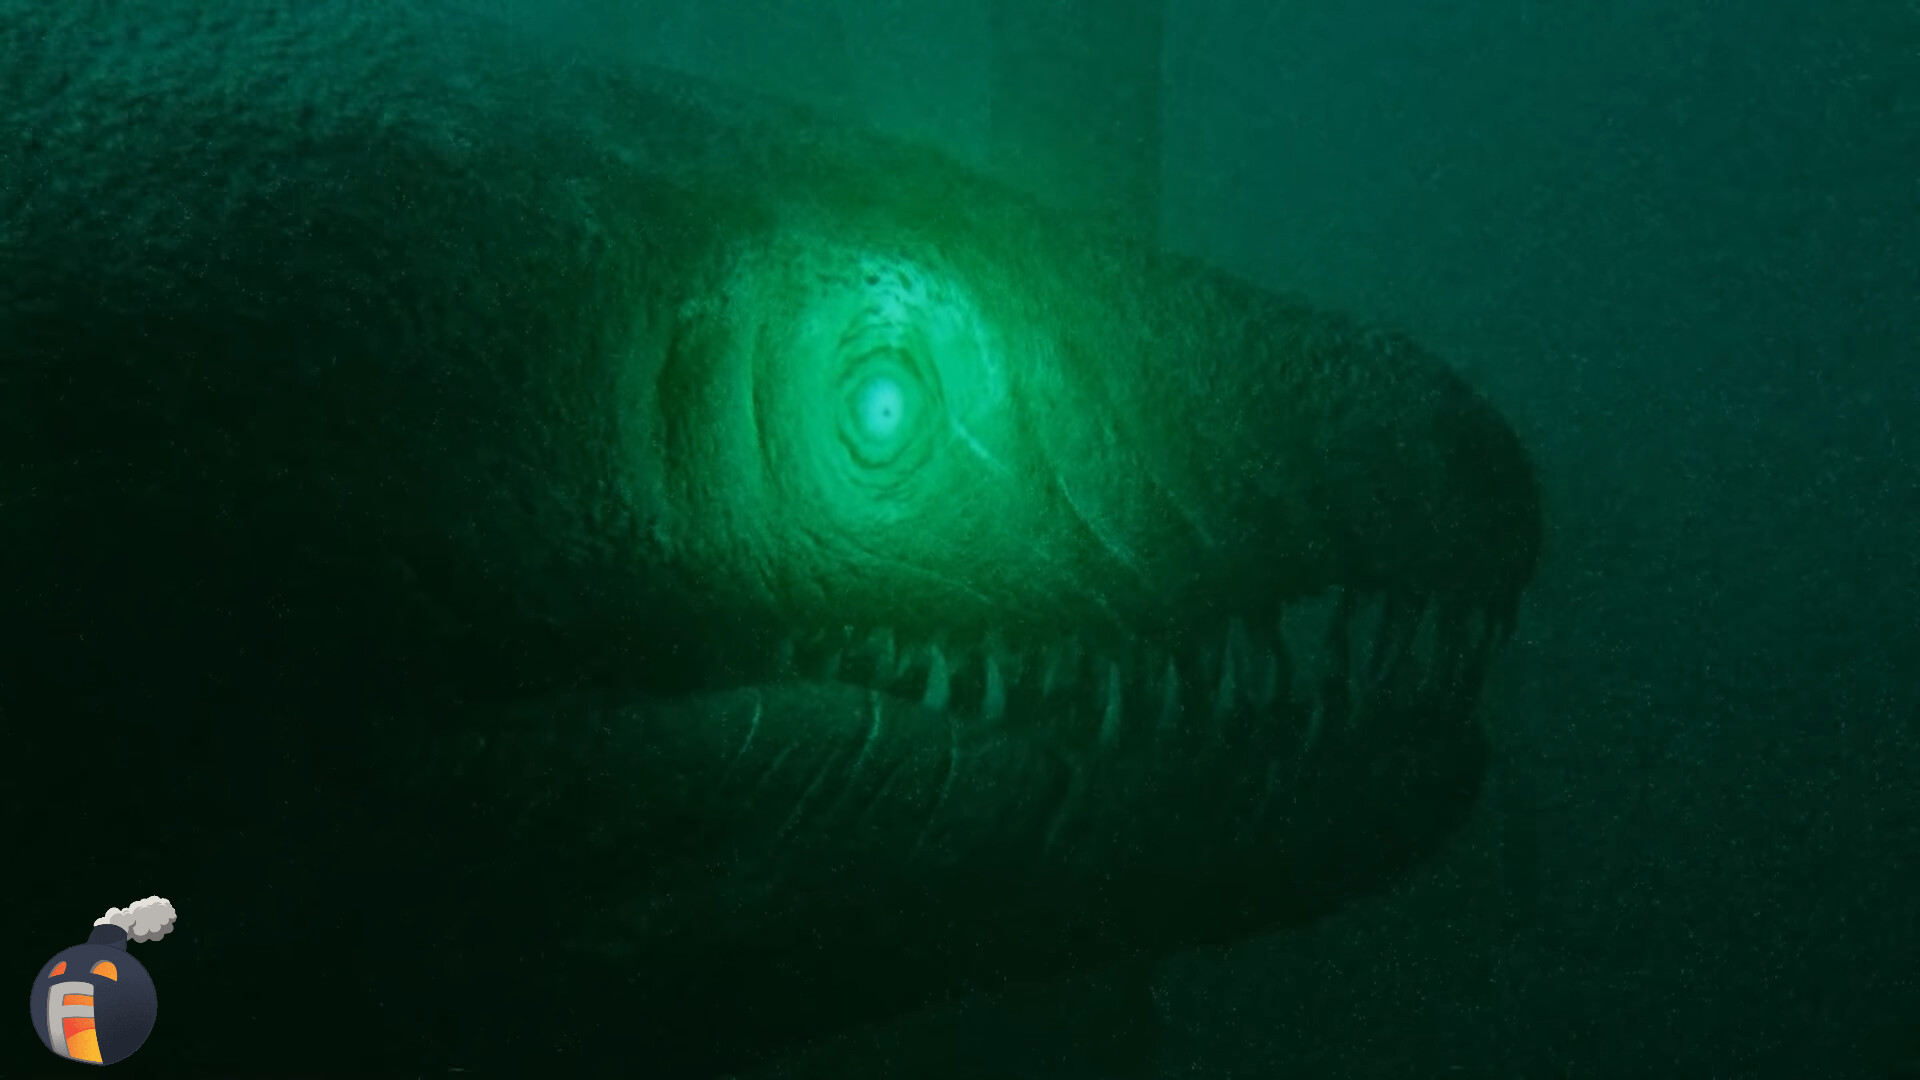 SCP 3000 Anantashesha, Anguilliformes, aquatic animal, video recording, SCP-3000 is a massive, aquatic, serpentine entity strongly resembling a  giant moray eel (Gymnothorax javanicus). The full length of SCP 3000 is